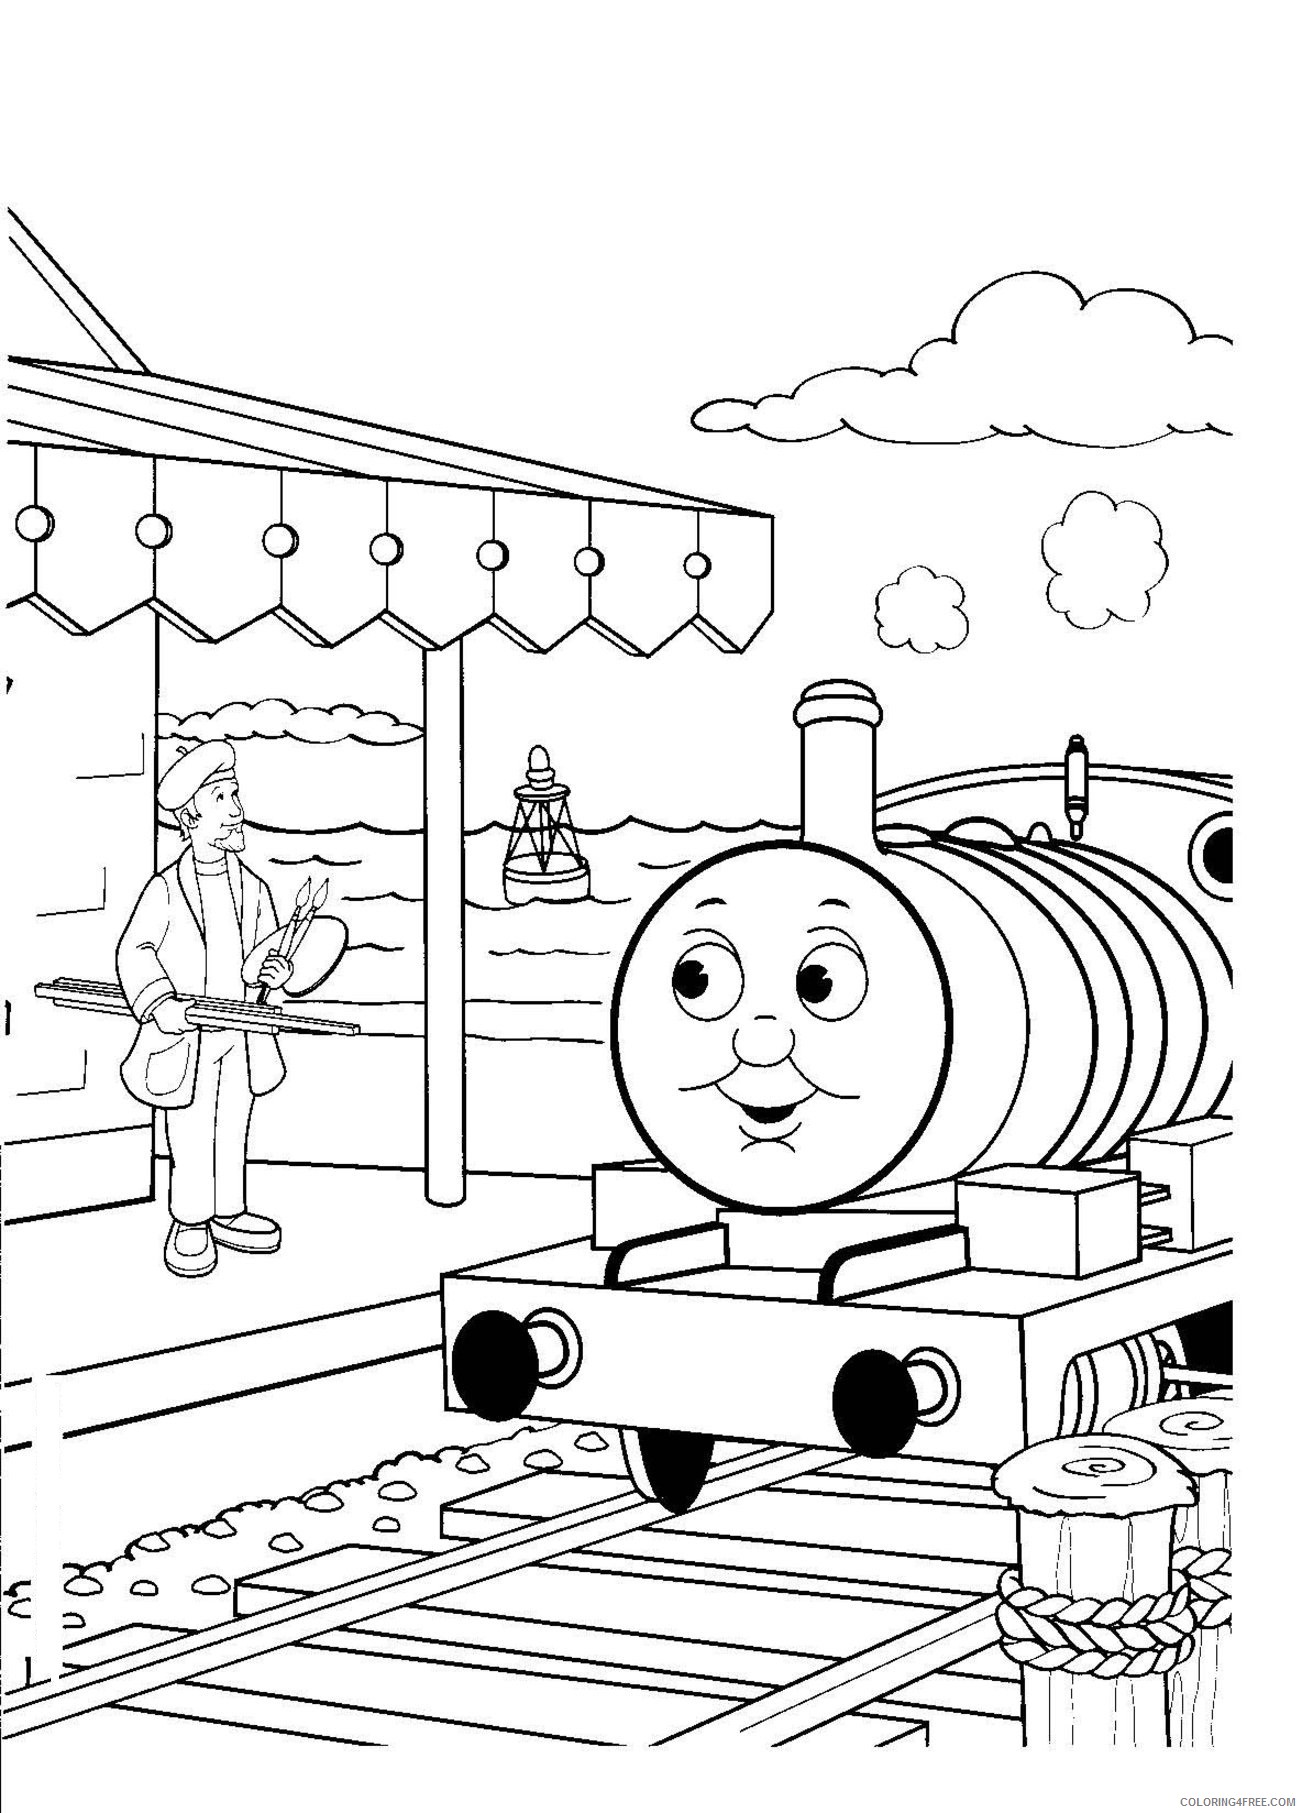 Thomas and Friends Coloring Pages Cartoons Printable Thomas The Train Printable 2020 6518 Coloring4free